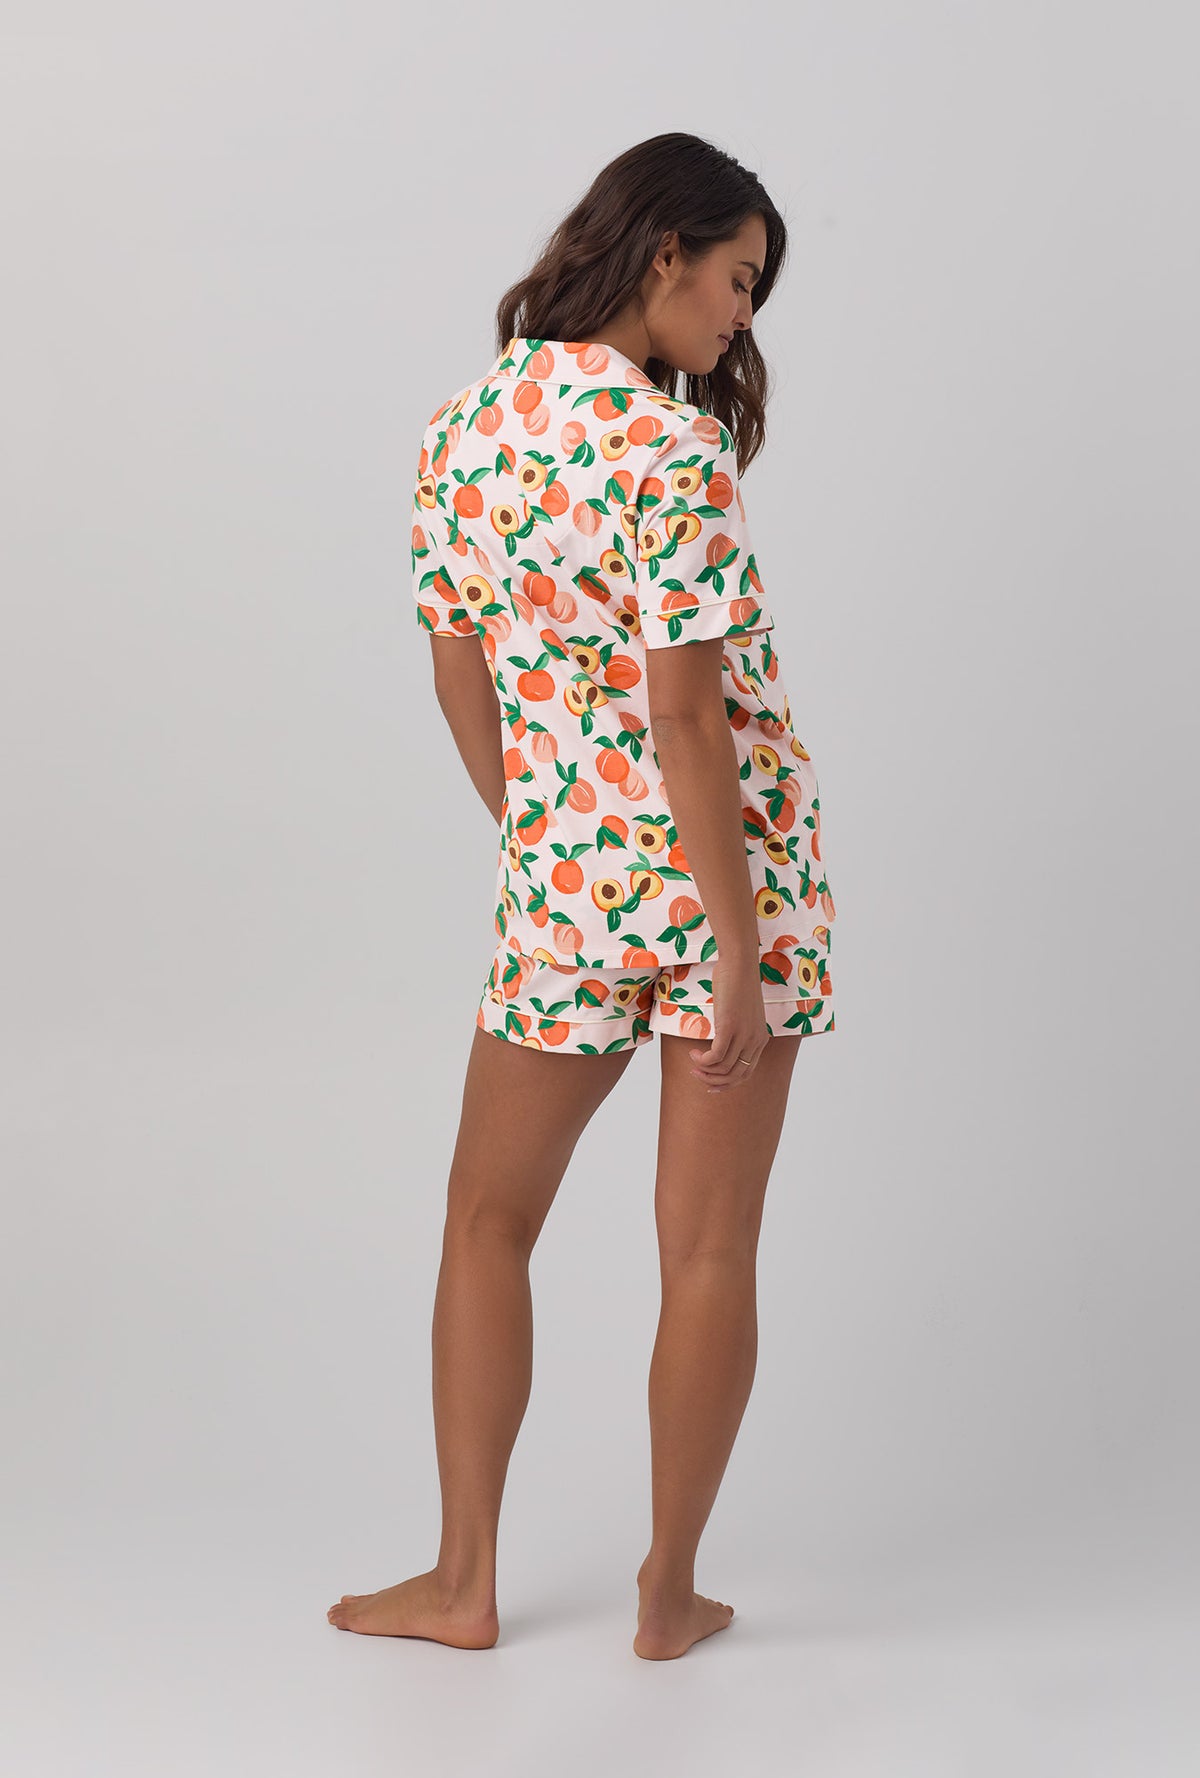 A lady wearing Short Sleeve Classic Shorty Stretch Jersey PJ Set with Peachy Keen print